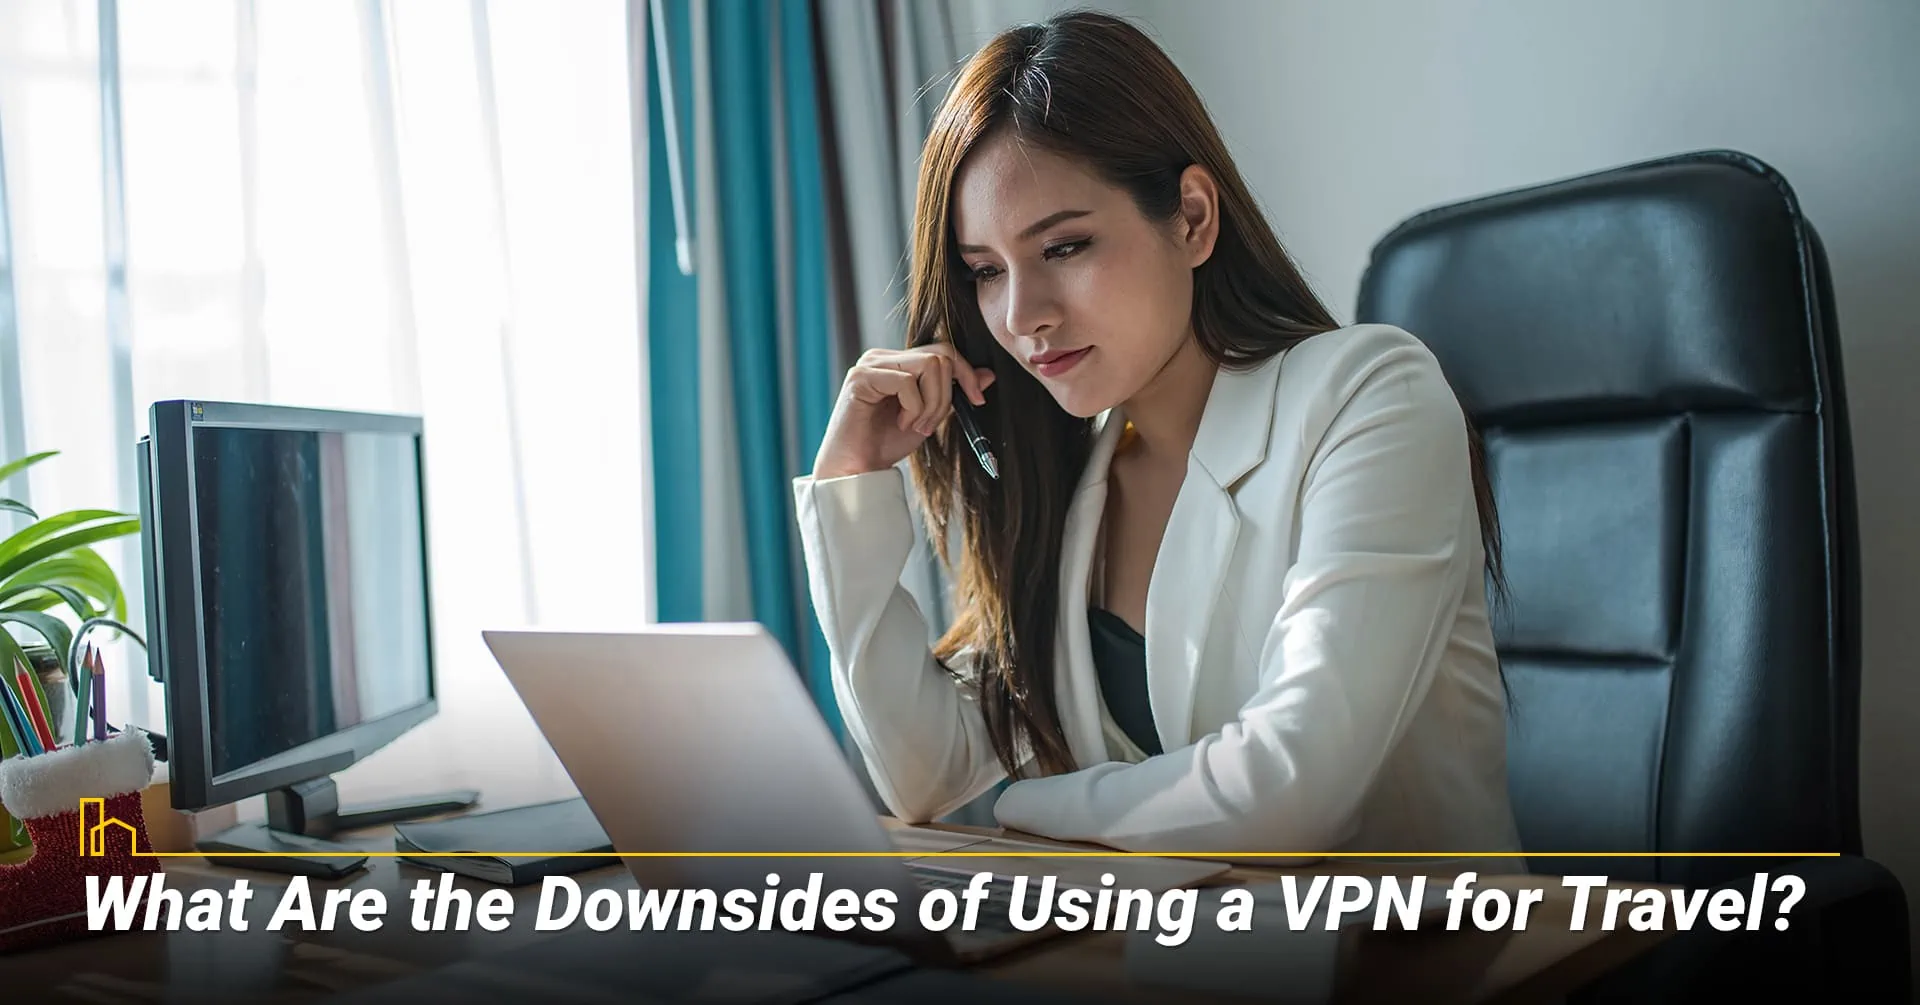 What Are the Downsides of Using a VPN for Travel?